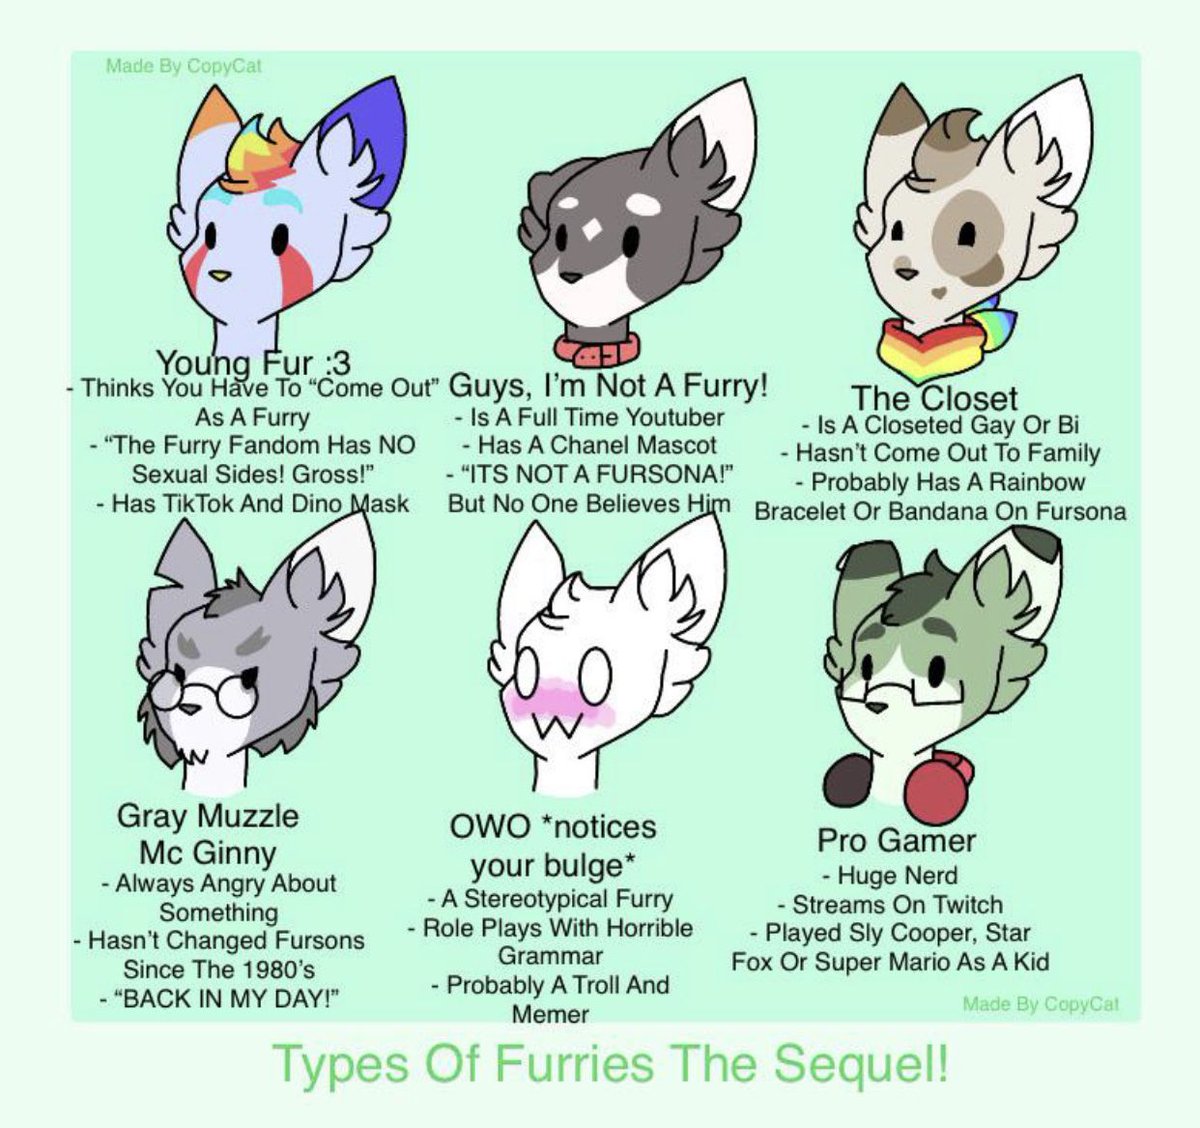 What kind of furry are you? 